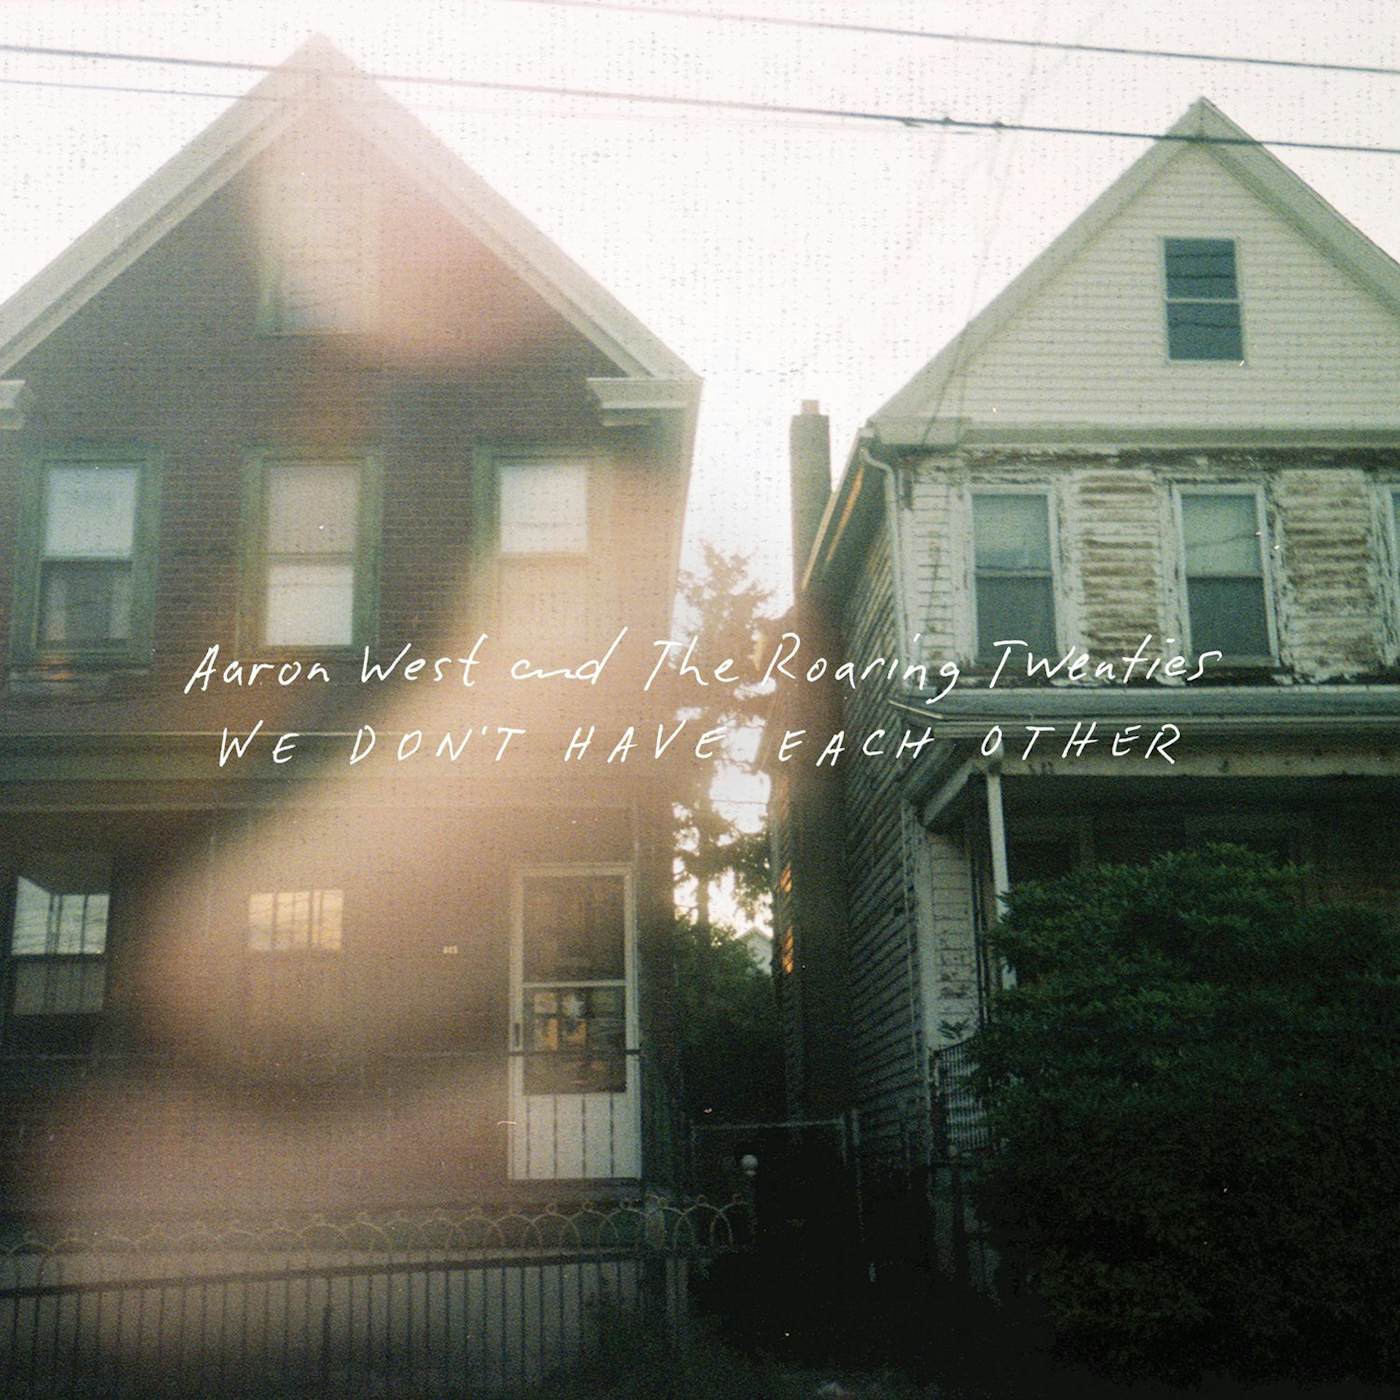 Aaron West and The Roaring Twenties WE DONT HAVE EACH OTHER CD